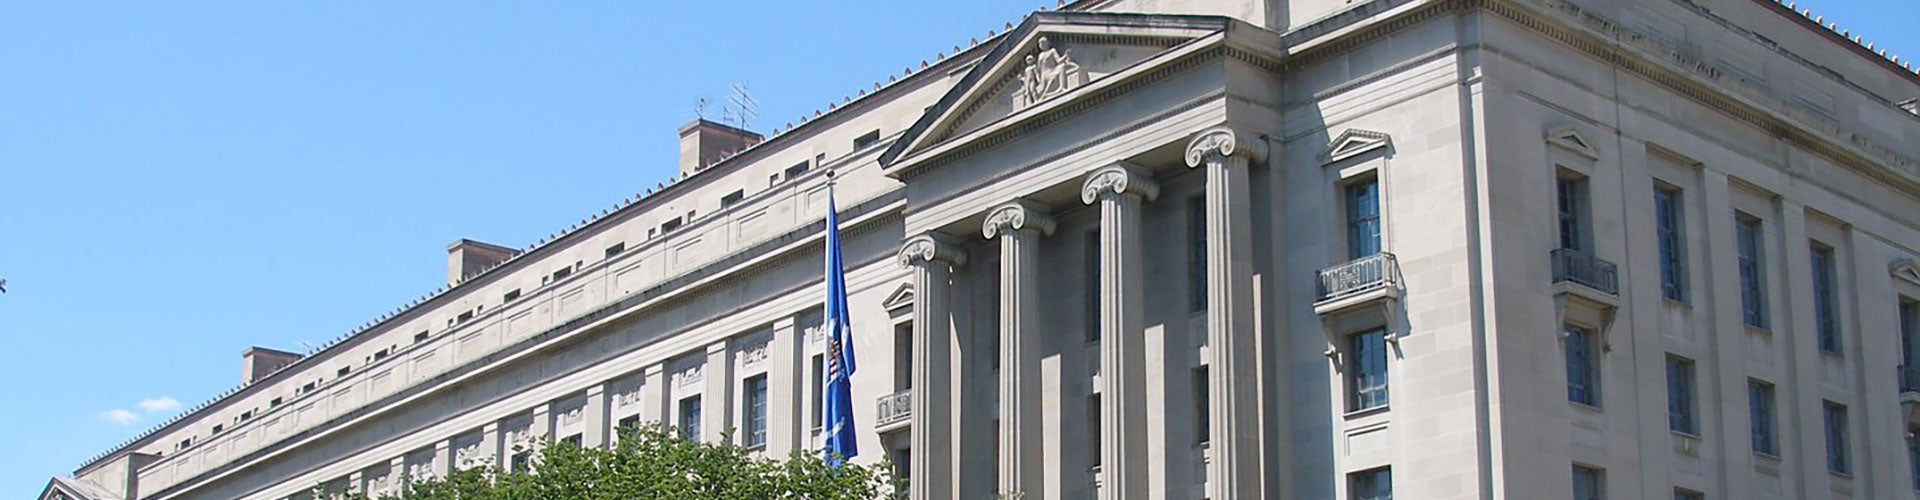 View of the exterior of the Department of Justice building in Washington, D.C.